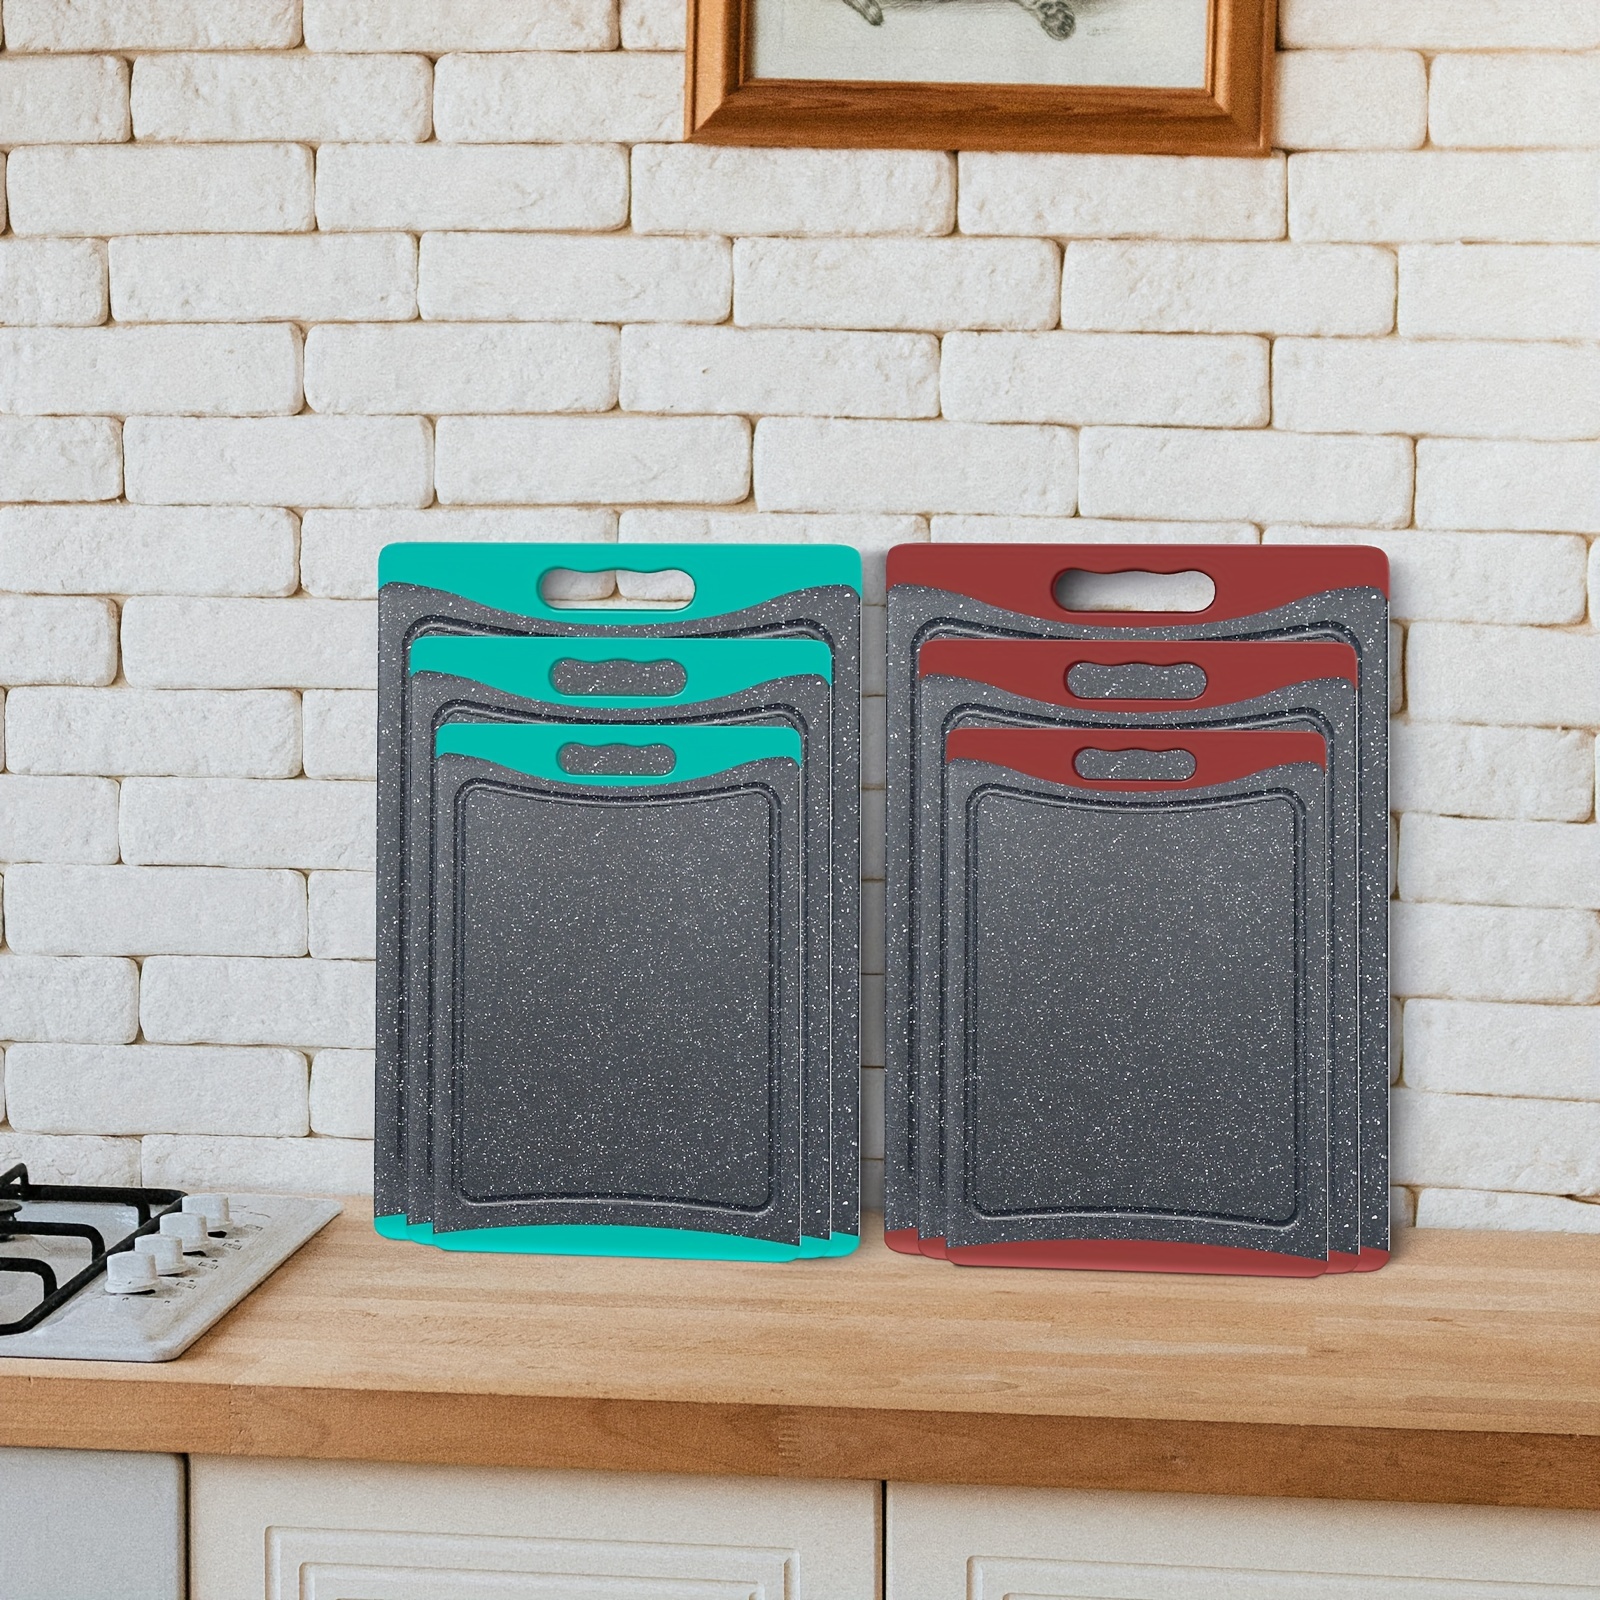 

Extra Large Cutting Boards, Plastic Cutting Boards For Kitchen (set Of 3) Cutting Board Set Dishwasher Chopping Board With Juice Easy-grip Handles, Dark Gray, Red, Turquoise, Perfect Gift Ideal